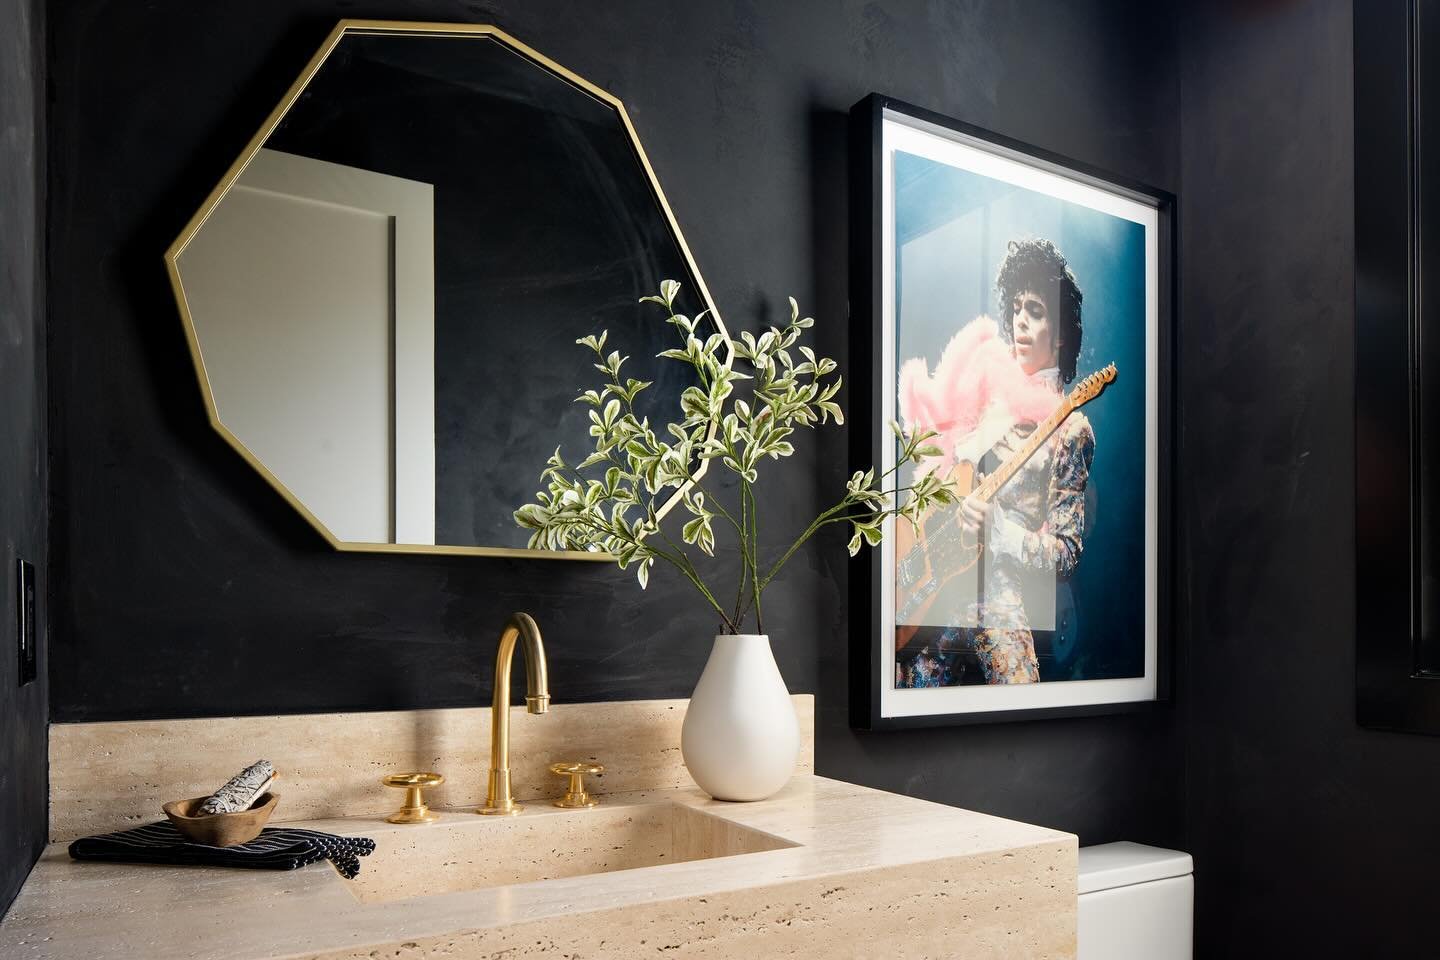 Travertine and rock n roll create a serious vibe 😎

📸@ambientlightca 
 Staged for @pardeeproperties 
.
.
.
. #Venicenative #propertystyling #homestaging  #interiordesign #interiors #realestate #lifestyle #decorating #interiordecor #instahome #homed